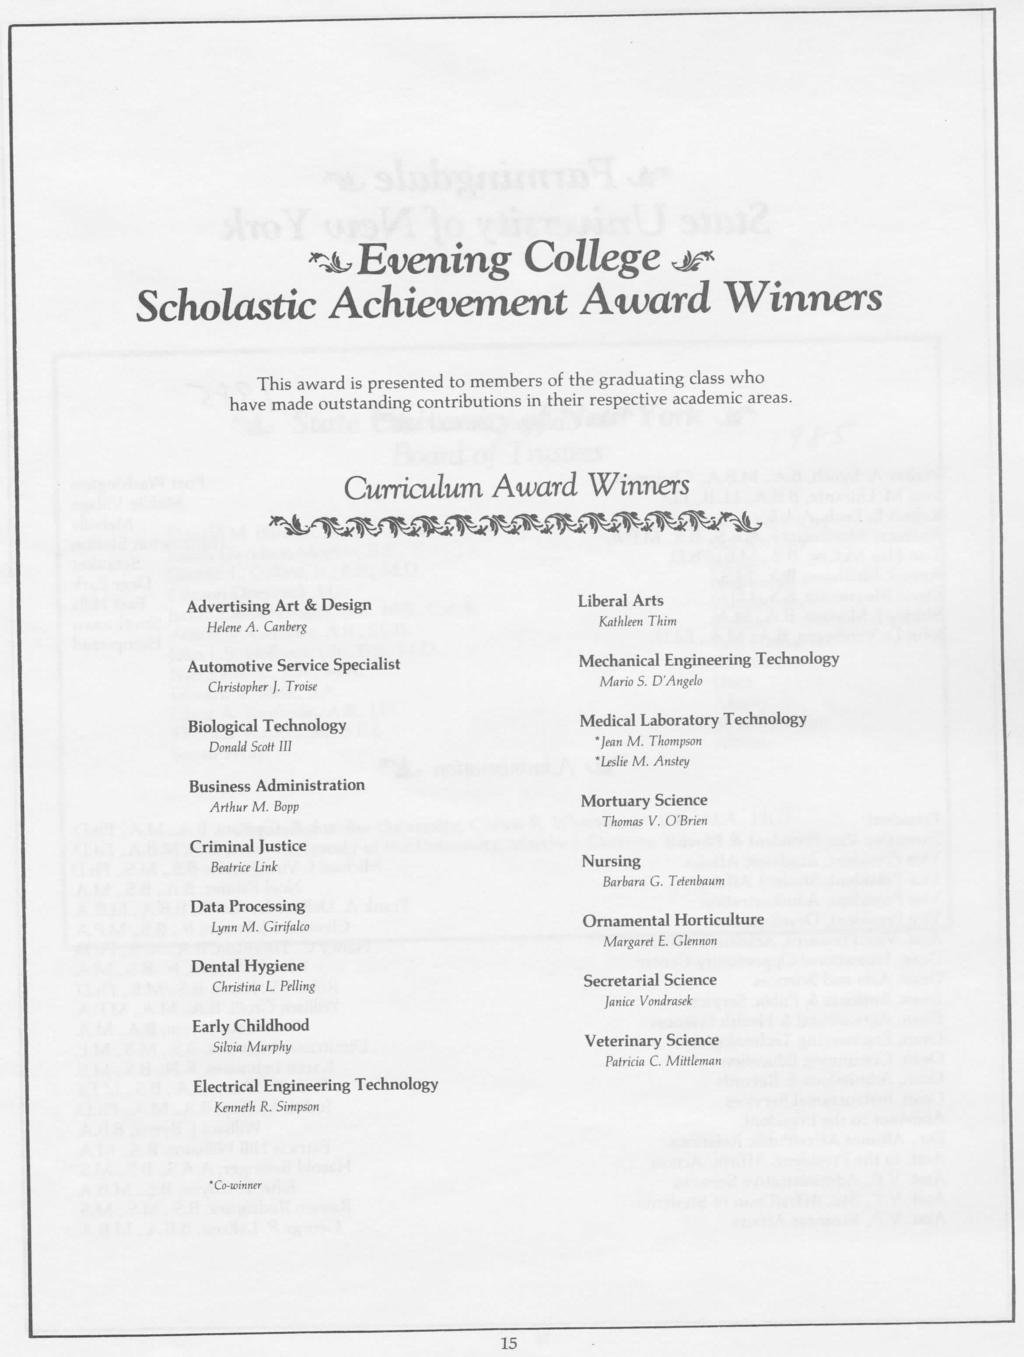 *^ Evening College Scholastic Achievement Award Winners This award is presented to members of the graduating class who have made outstanding contributions in their respective academic areas.